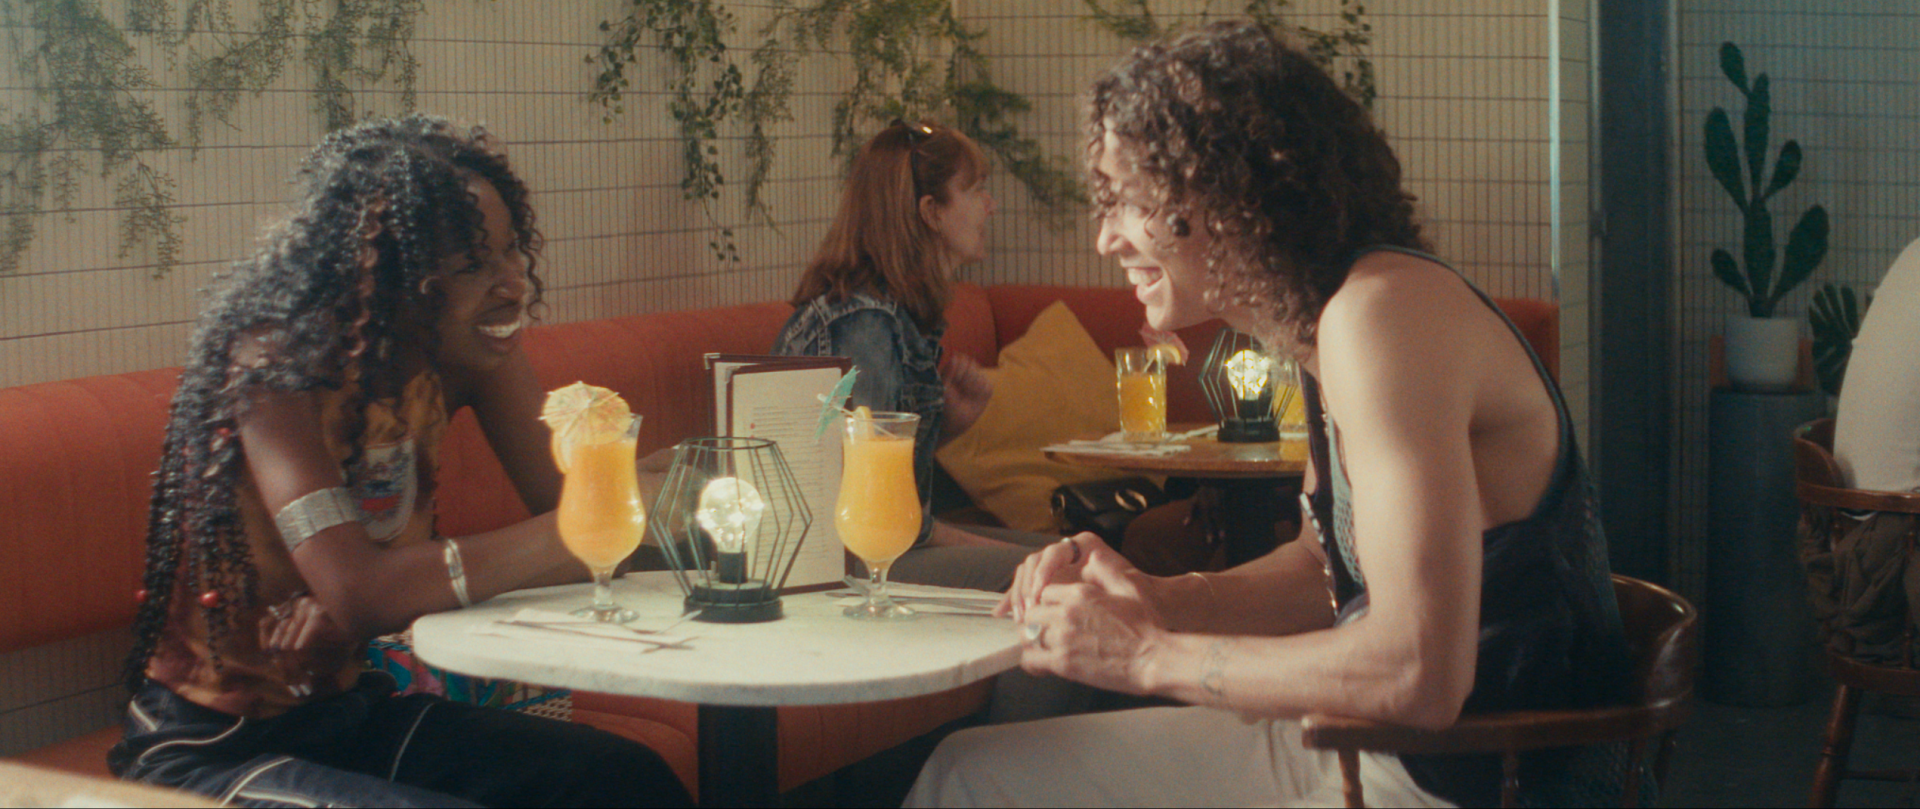 A Black woman is captured on a date with her estranged mixed-raced male identifying ex. They are conversing over two glasses of orange juice at a brunch restaurant.